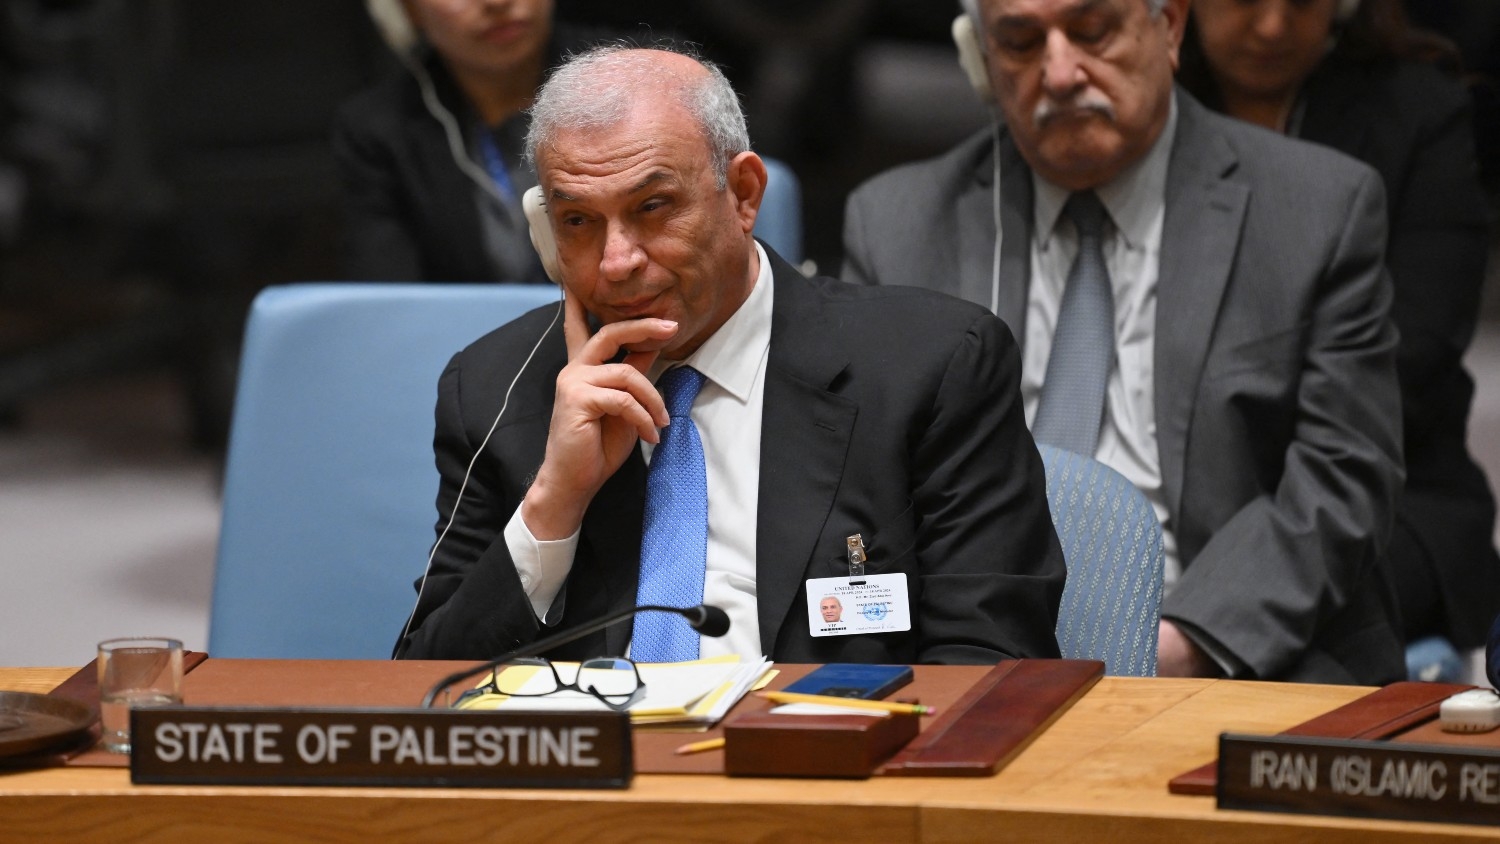 Ziad Abu-Amr, member of the Palestinian Legislative Council, listens during a UN Security Council meeting at UN headquarters in New York City on 18 April 2024.